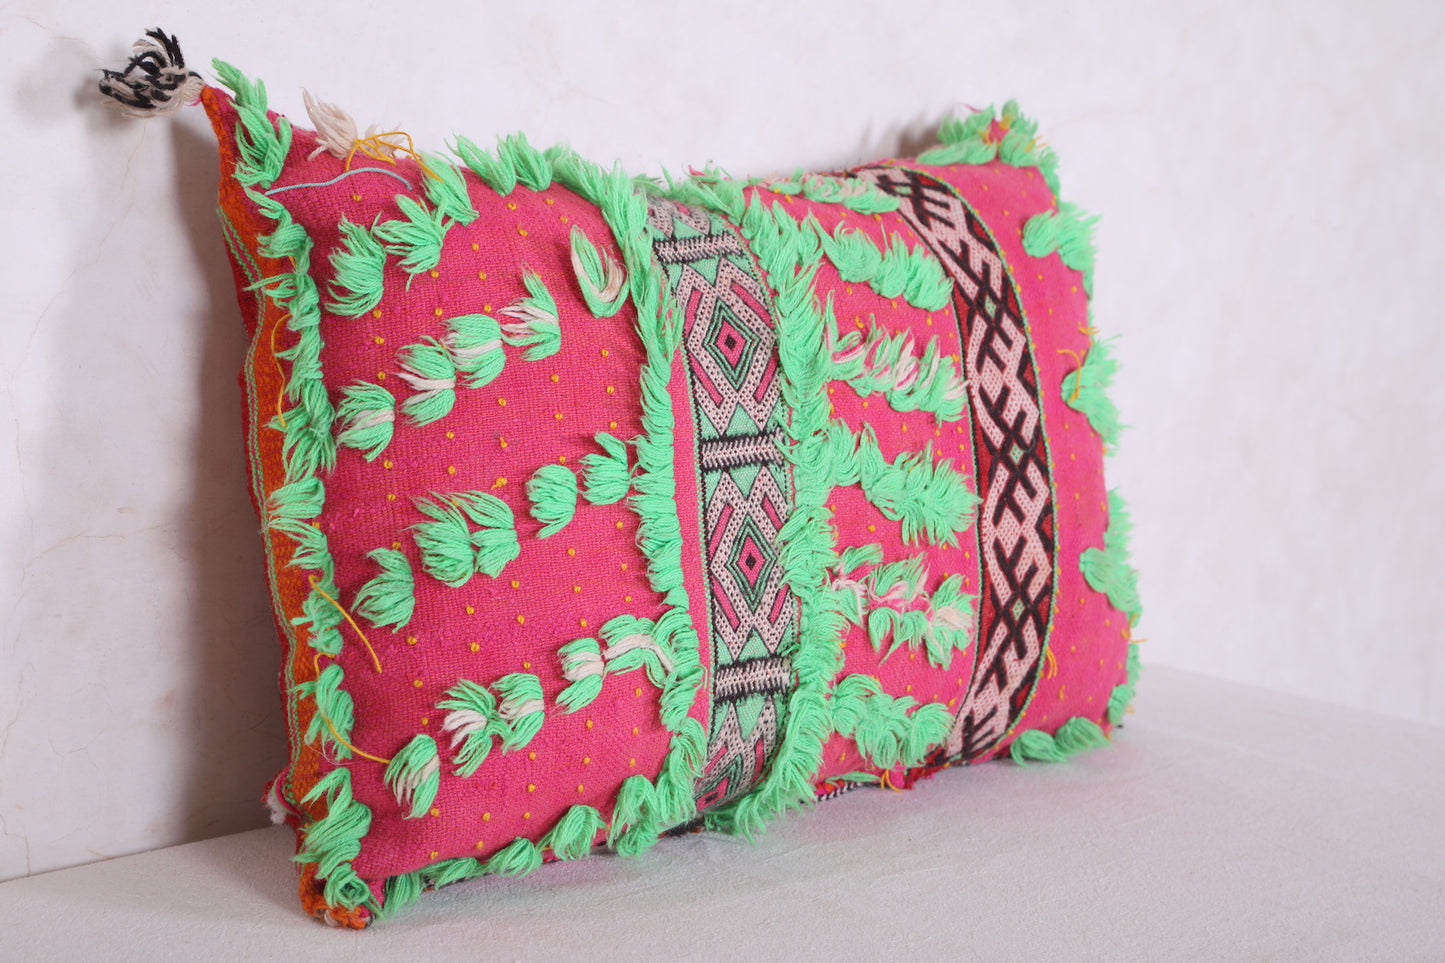 Colorful Pillow 16.1 INCHES X 24 INCHE